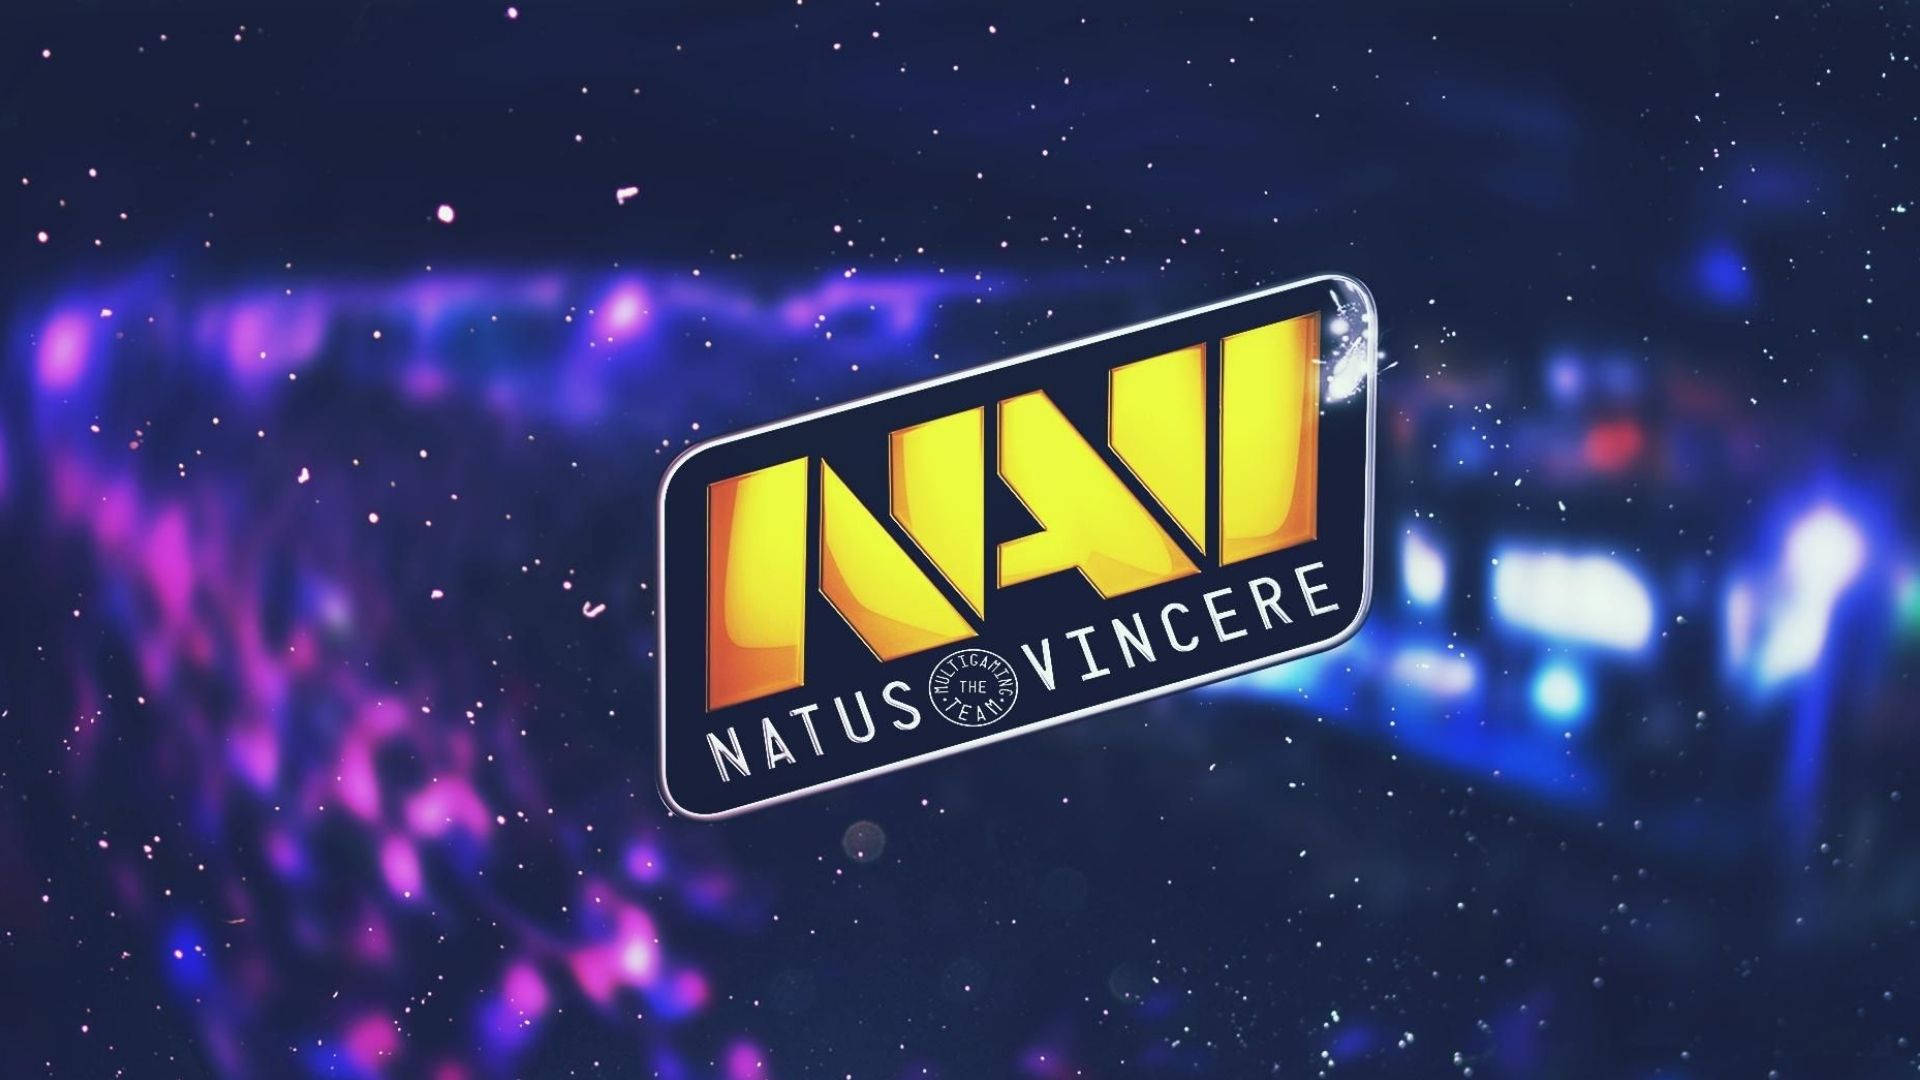 Natus Vincere Colorful Background Background